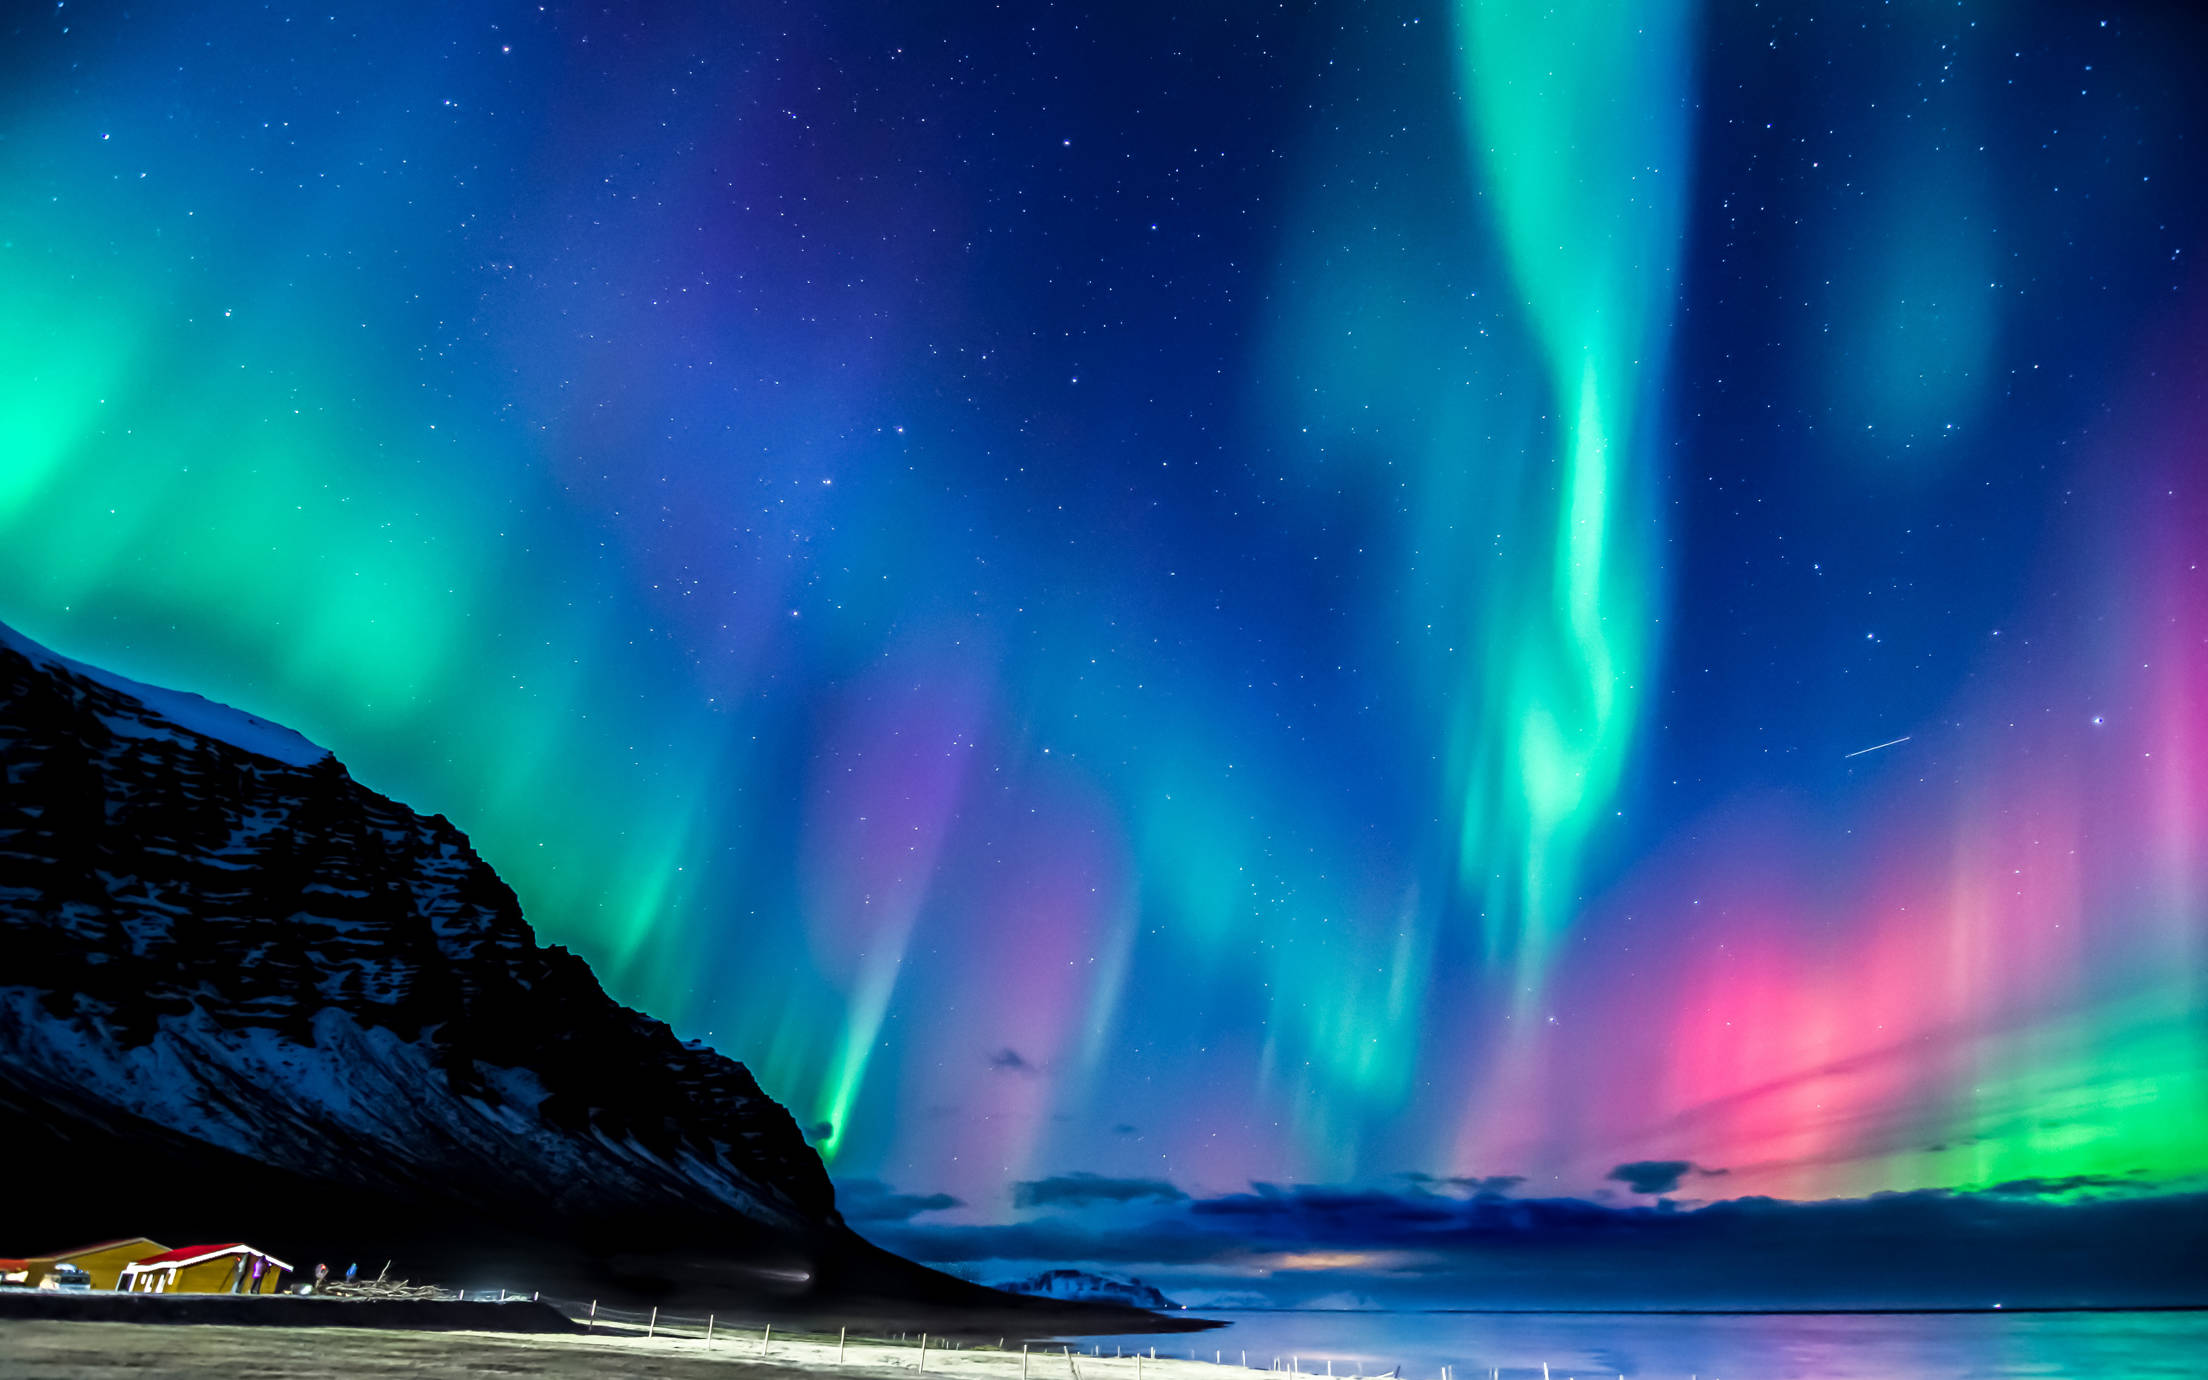 Northern lights over a small village, the ocean and surrounding mountains